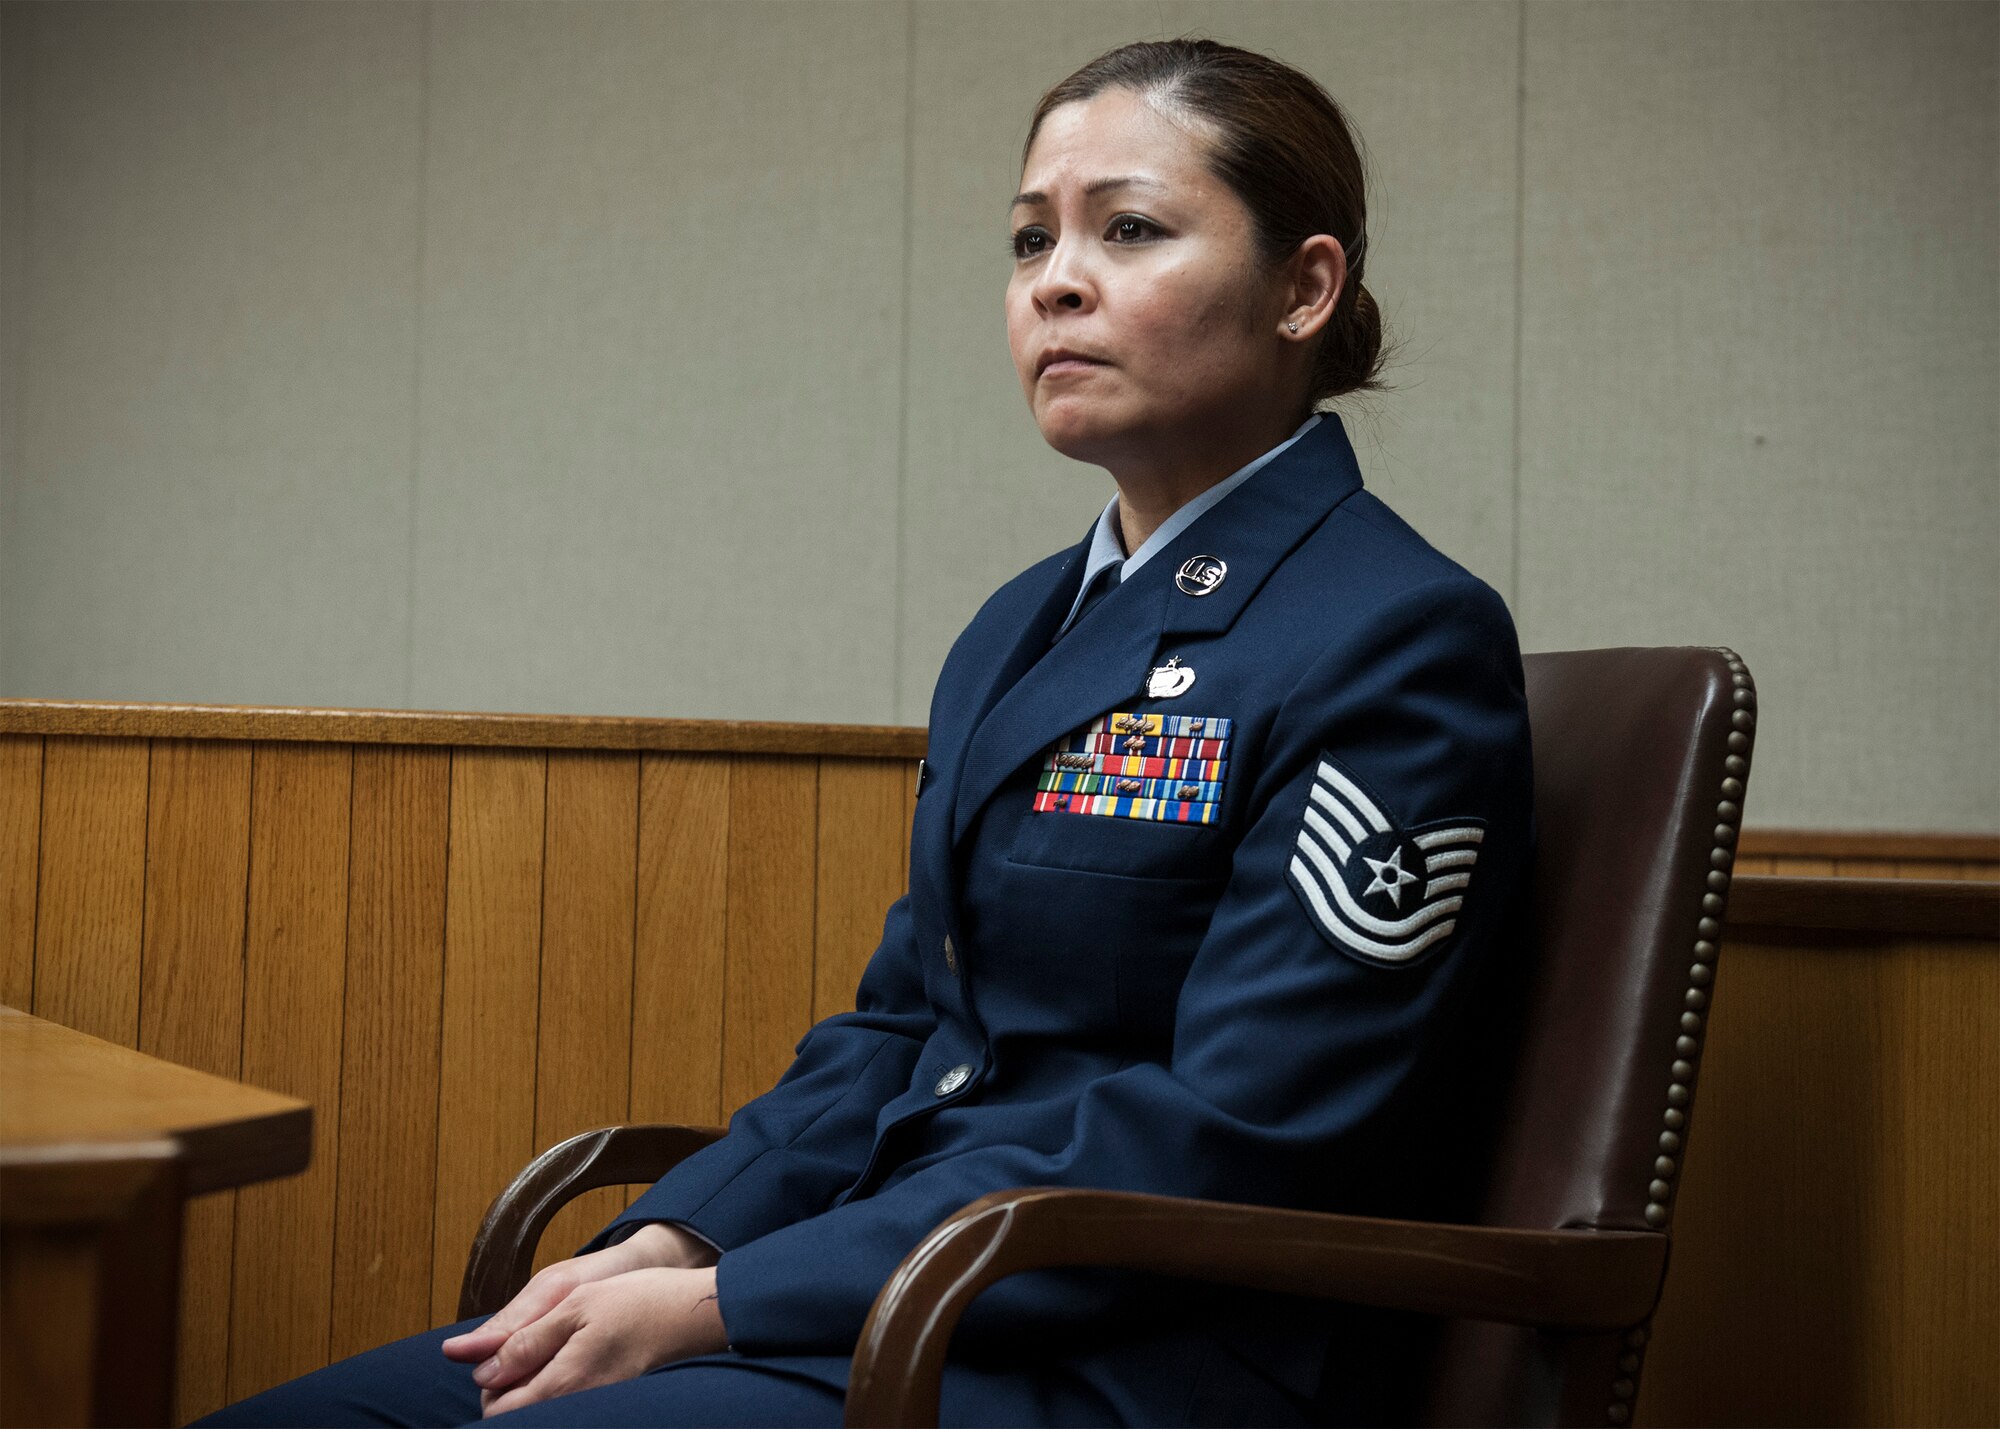 Tech. Sgt. Katherine Simpkins testifies against an alleged perpetrator during a sexual assault mock trial Feb. 24, 2015, at Kunsan Air Base, South Korea. Mock trials are just one of Kunsan’s Sexual Assault Prevention and Response programs, which take a unique approach to prevention by emphasizing the aftermath of a sexual assault case that goes to trial. (U.S. Air Force photo/Senior Airman Katrina Heikkinen)